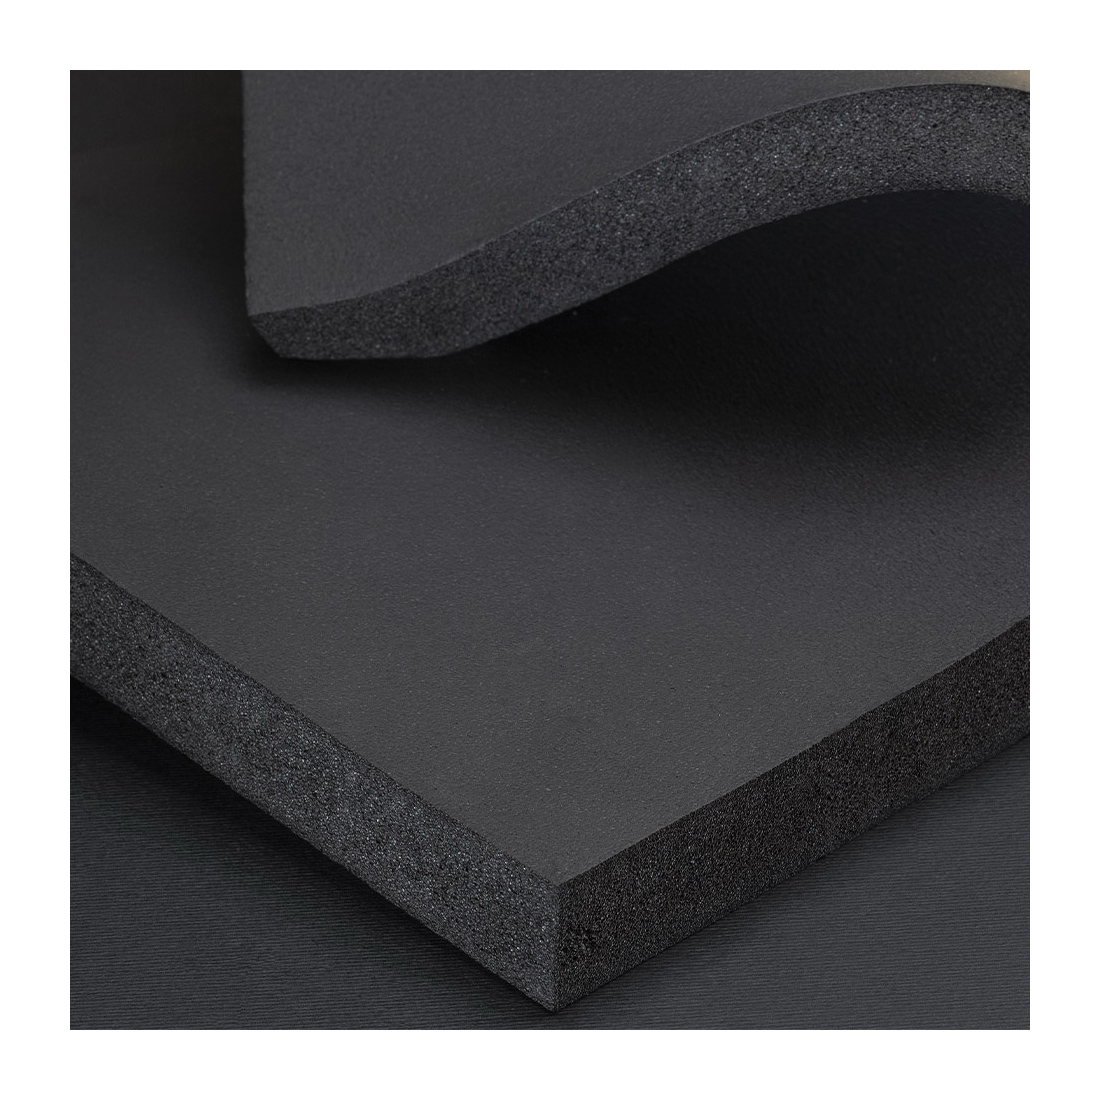 K-Flex INSUL-SHEET® 6RSX200015 Flexible Foam Insulation, 1/4 in Thick Wall, 2 in ID, 15 ft L, 3 to 6 pcf Density